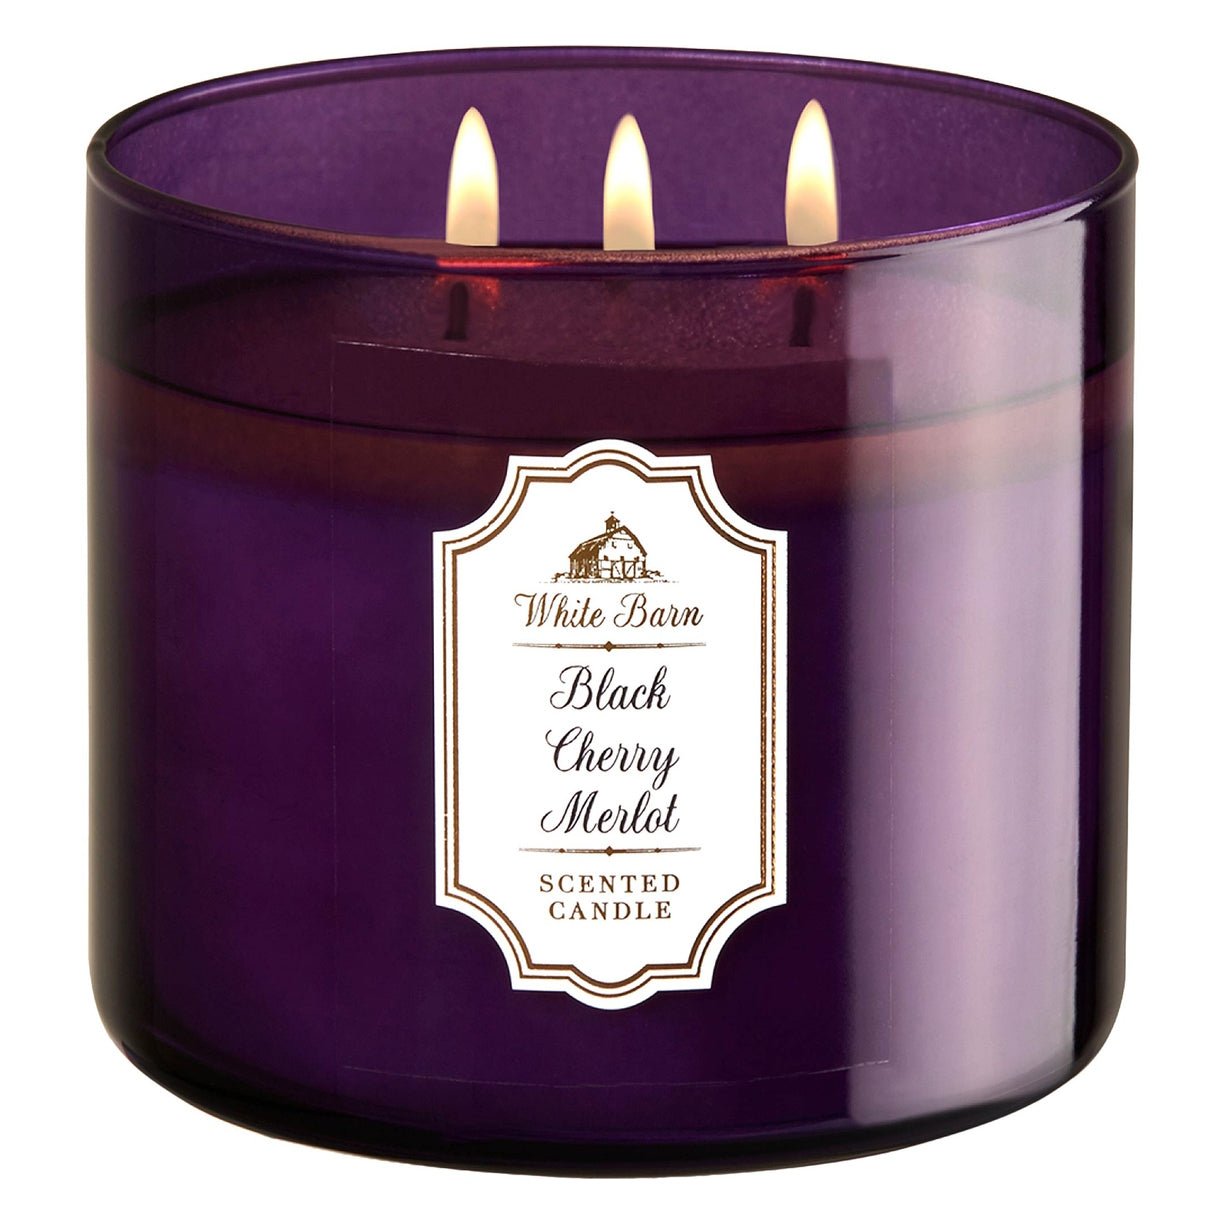  Scented Candle Black Cherry Merlot,150G Perfume Floral